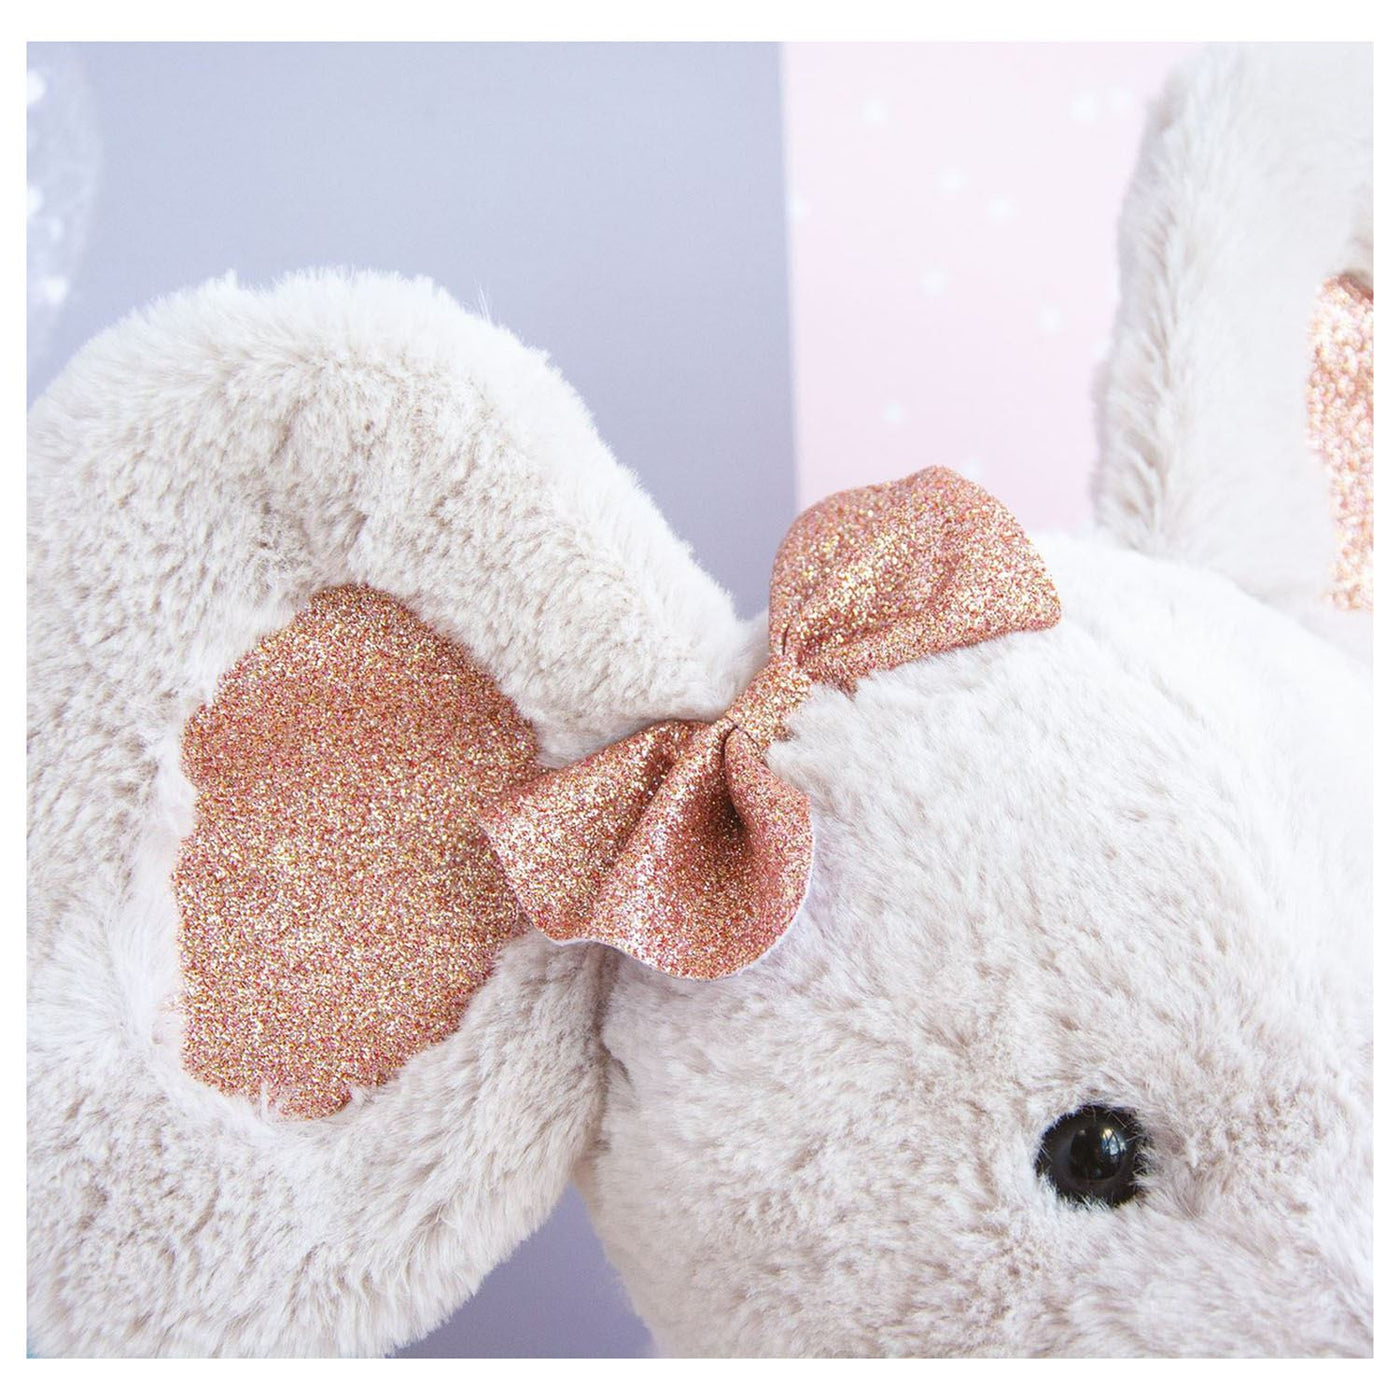 Personalised Signature DouDou Gift Set for Girls- Patchwork Quilt, Plush Toy & Suede Shoes - WowWee.ie Personalised Gifts